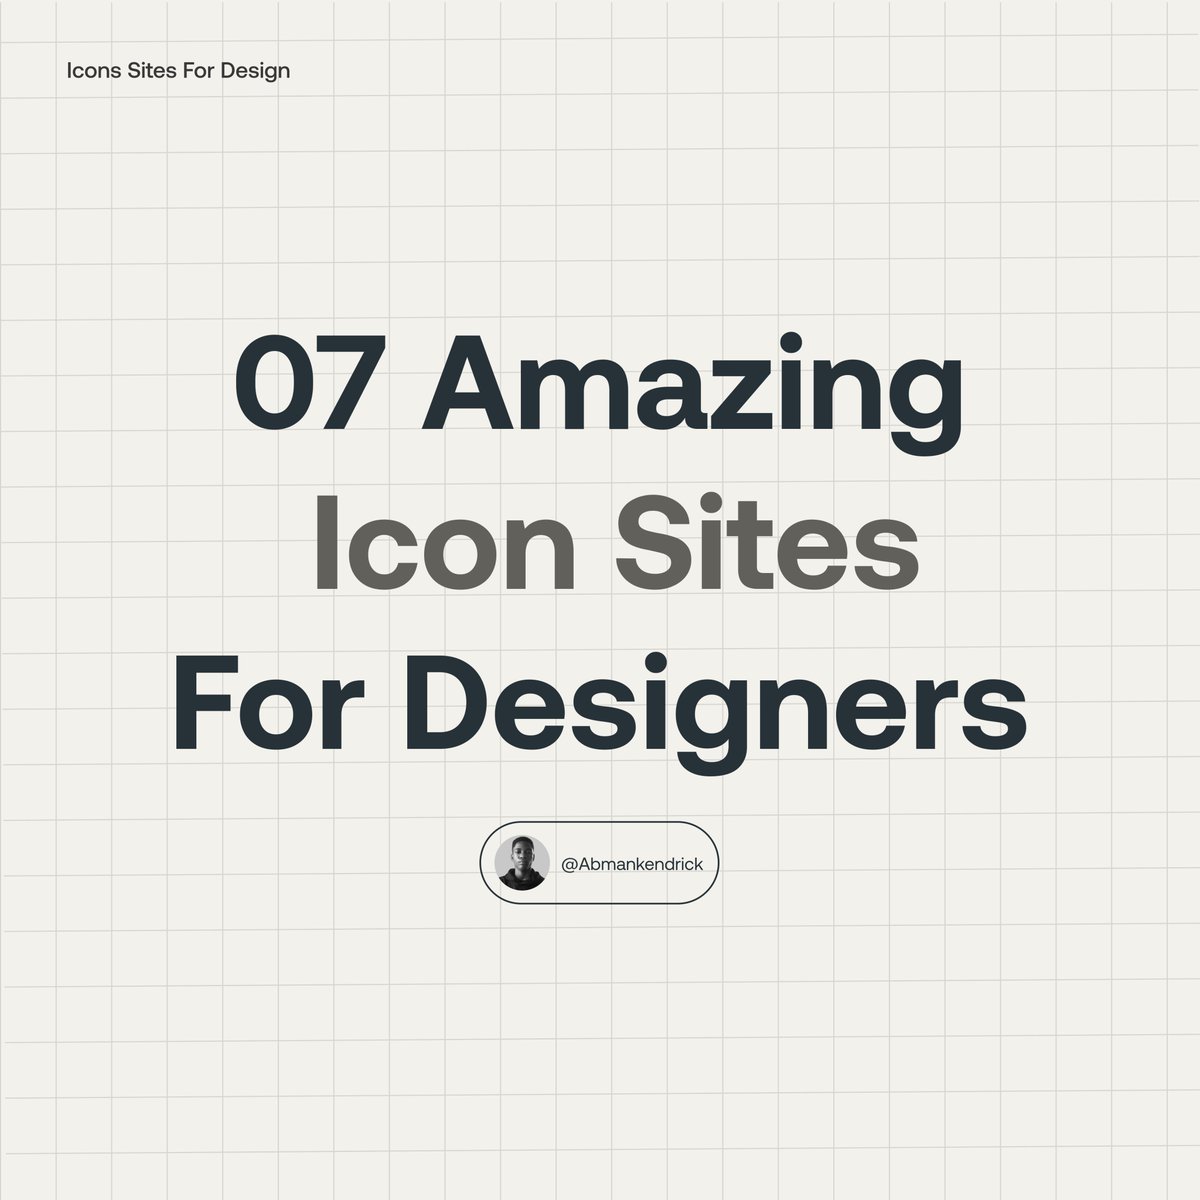 UI/UX Designers and Developers, If you are looking for icons to use for your next UI design project, I'll share with you 07 amazing icon sites to find beautiful icons for your design project. Bookmark it for later 💜